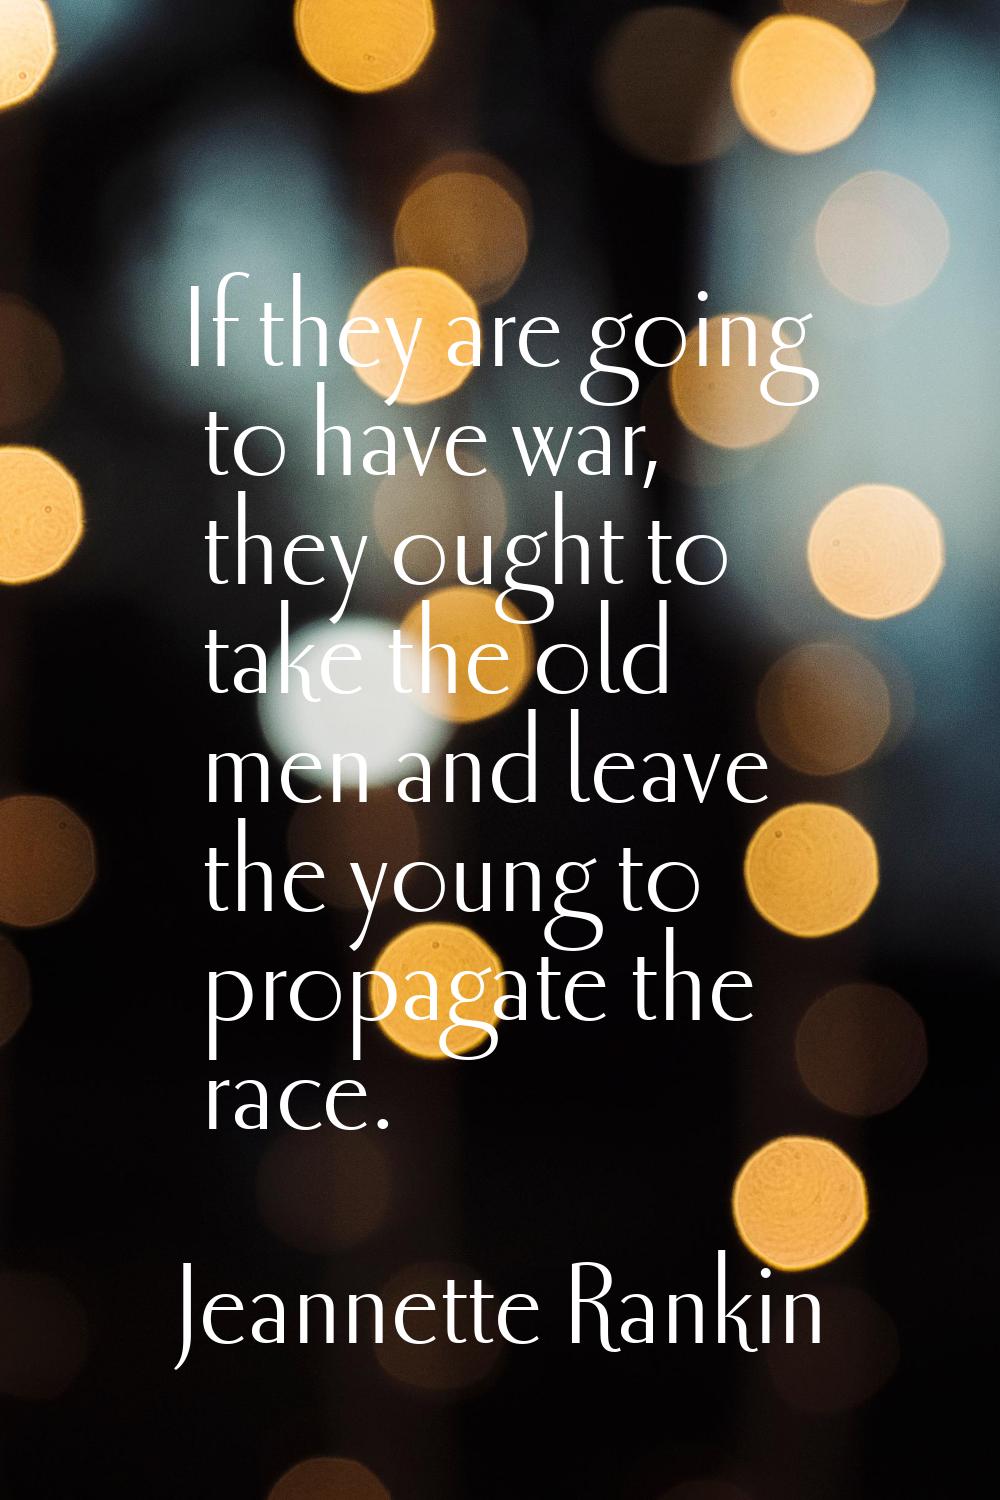 If they are going to have war, they ought to take the old men and leave the young to propagate the 